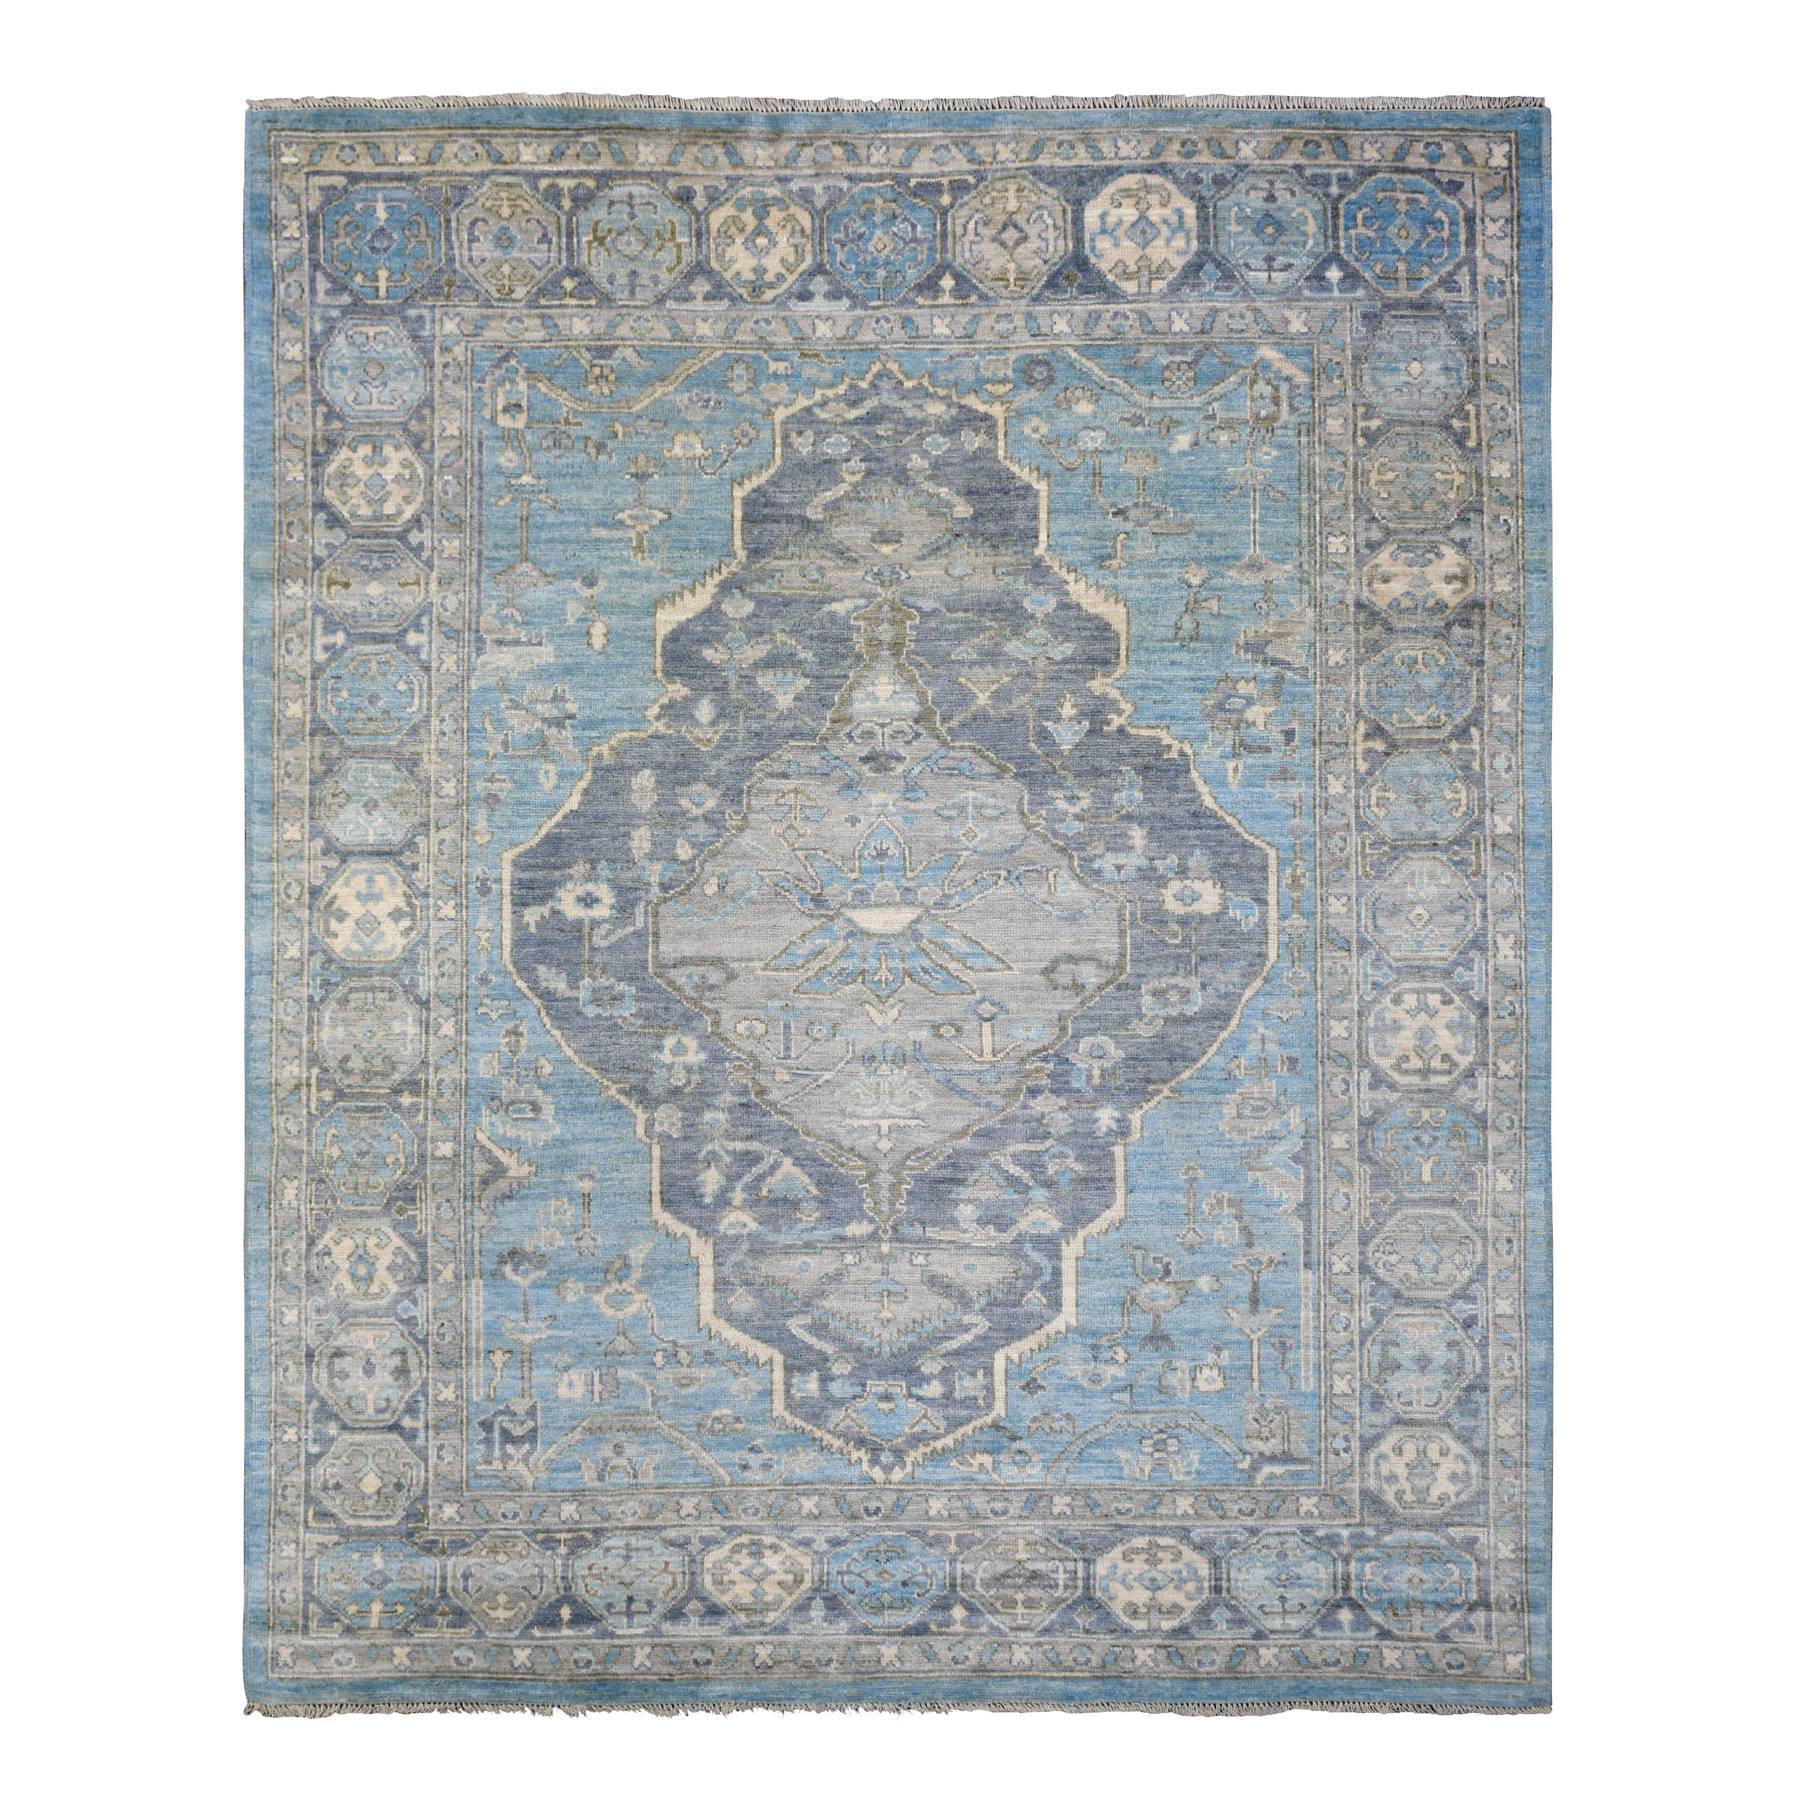 8'x9'6" Light Blue, Hand Woven Anatolian Village Inspired with Large Medallion Design, Natural Dyes Soft Wool, Oriental Rug 